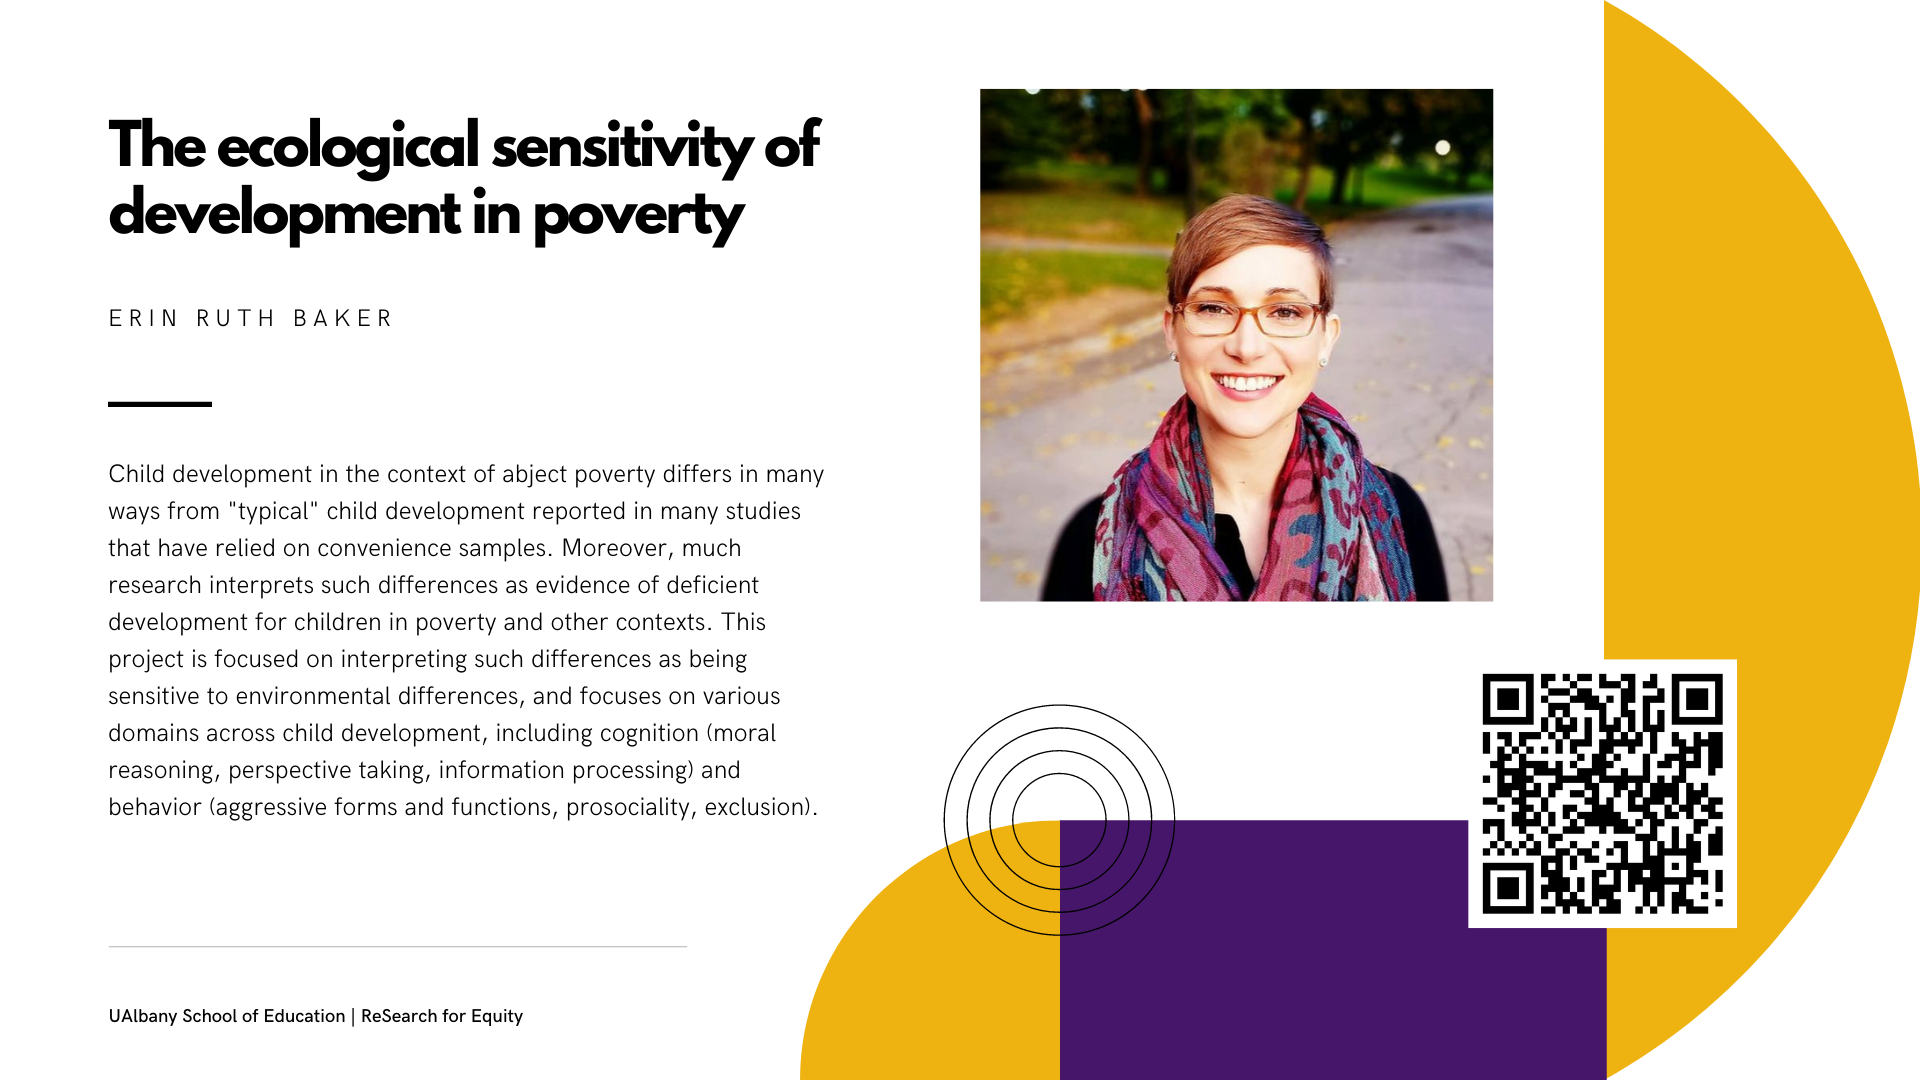 white slide with title and same text as caption, purple and yellow shapes to the right, photo of smiling Erin Baker outside on the street with glasses and colorful scarf, QR code